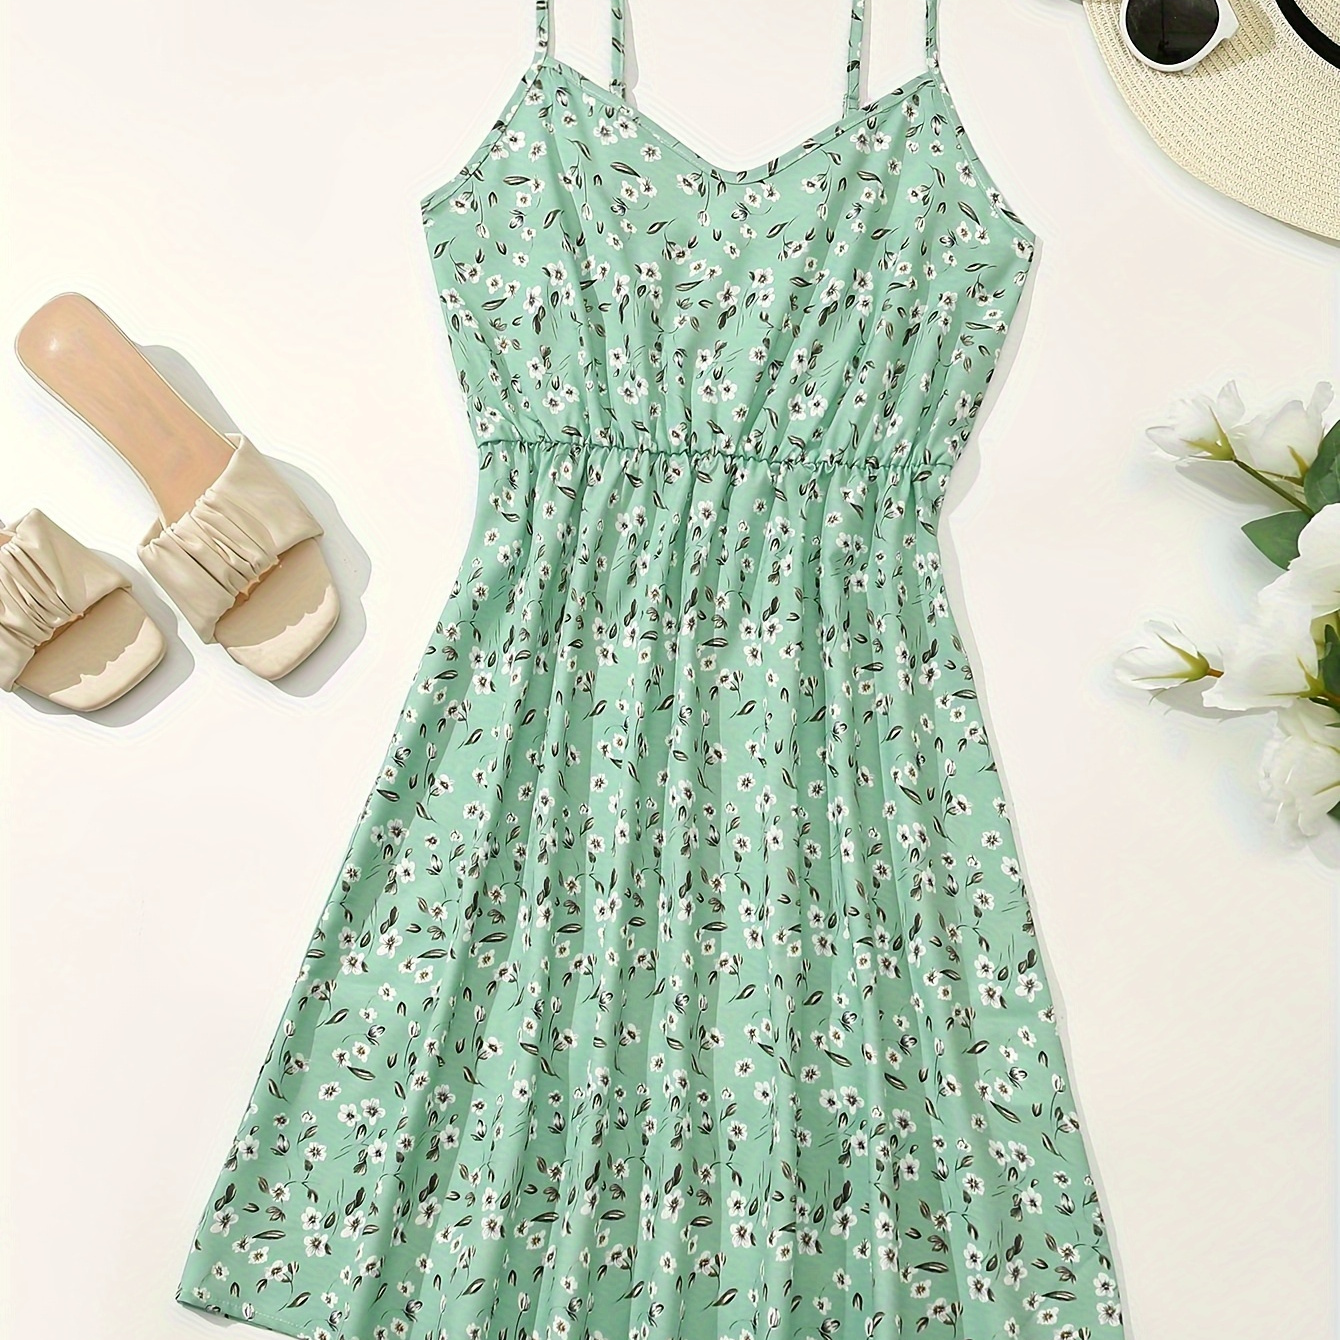 

Floral Print Spaghetti Strap Dress, Vacation Style Sleeveless Mini Dress For Spring & Summer, Women's Clothing